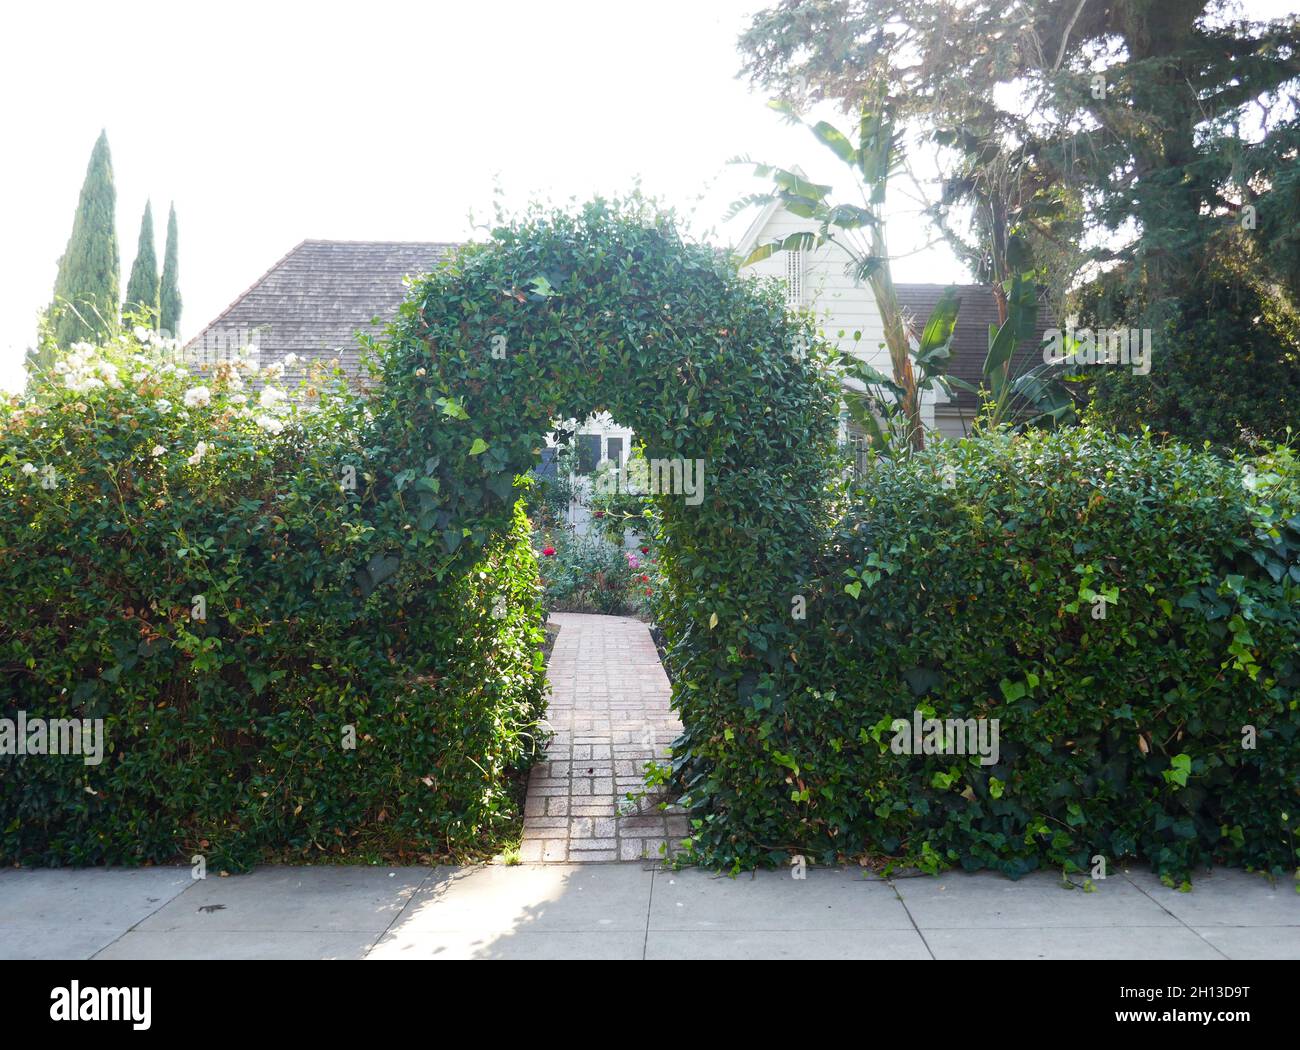 Beverly Hills, California, USA 8th September 2021 A general view of atmosphere of Actor Akim Tamiroff's Former Home/house at 515 N. Rexford Drive on September 8, 2021 in Beverly Hills, California, USA. Photo by Barry King/Alamy Stock Photo Stock Photo